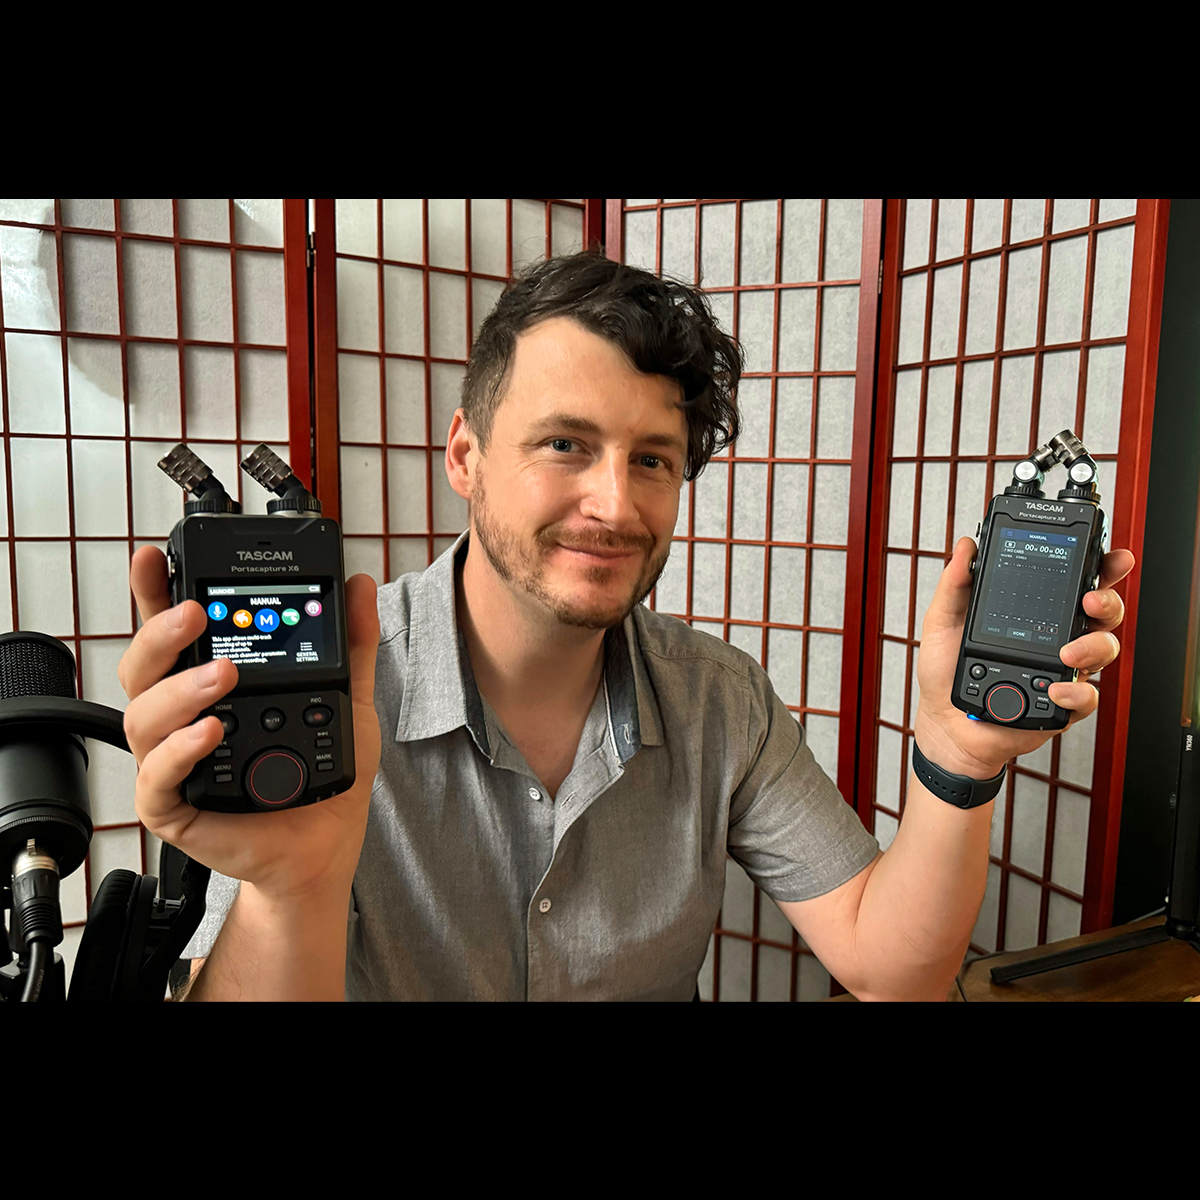 TASCAM Portacapture X8 and X6 Portable Audio Field Recorders  Help Michael Fitzgerald Capture Sound Effortlessly